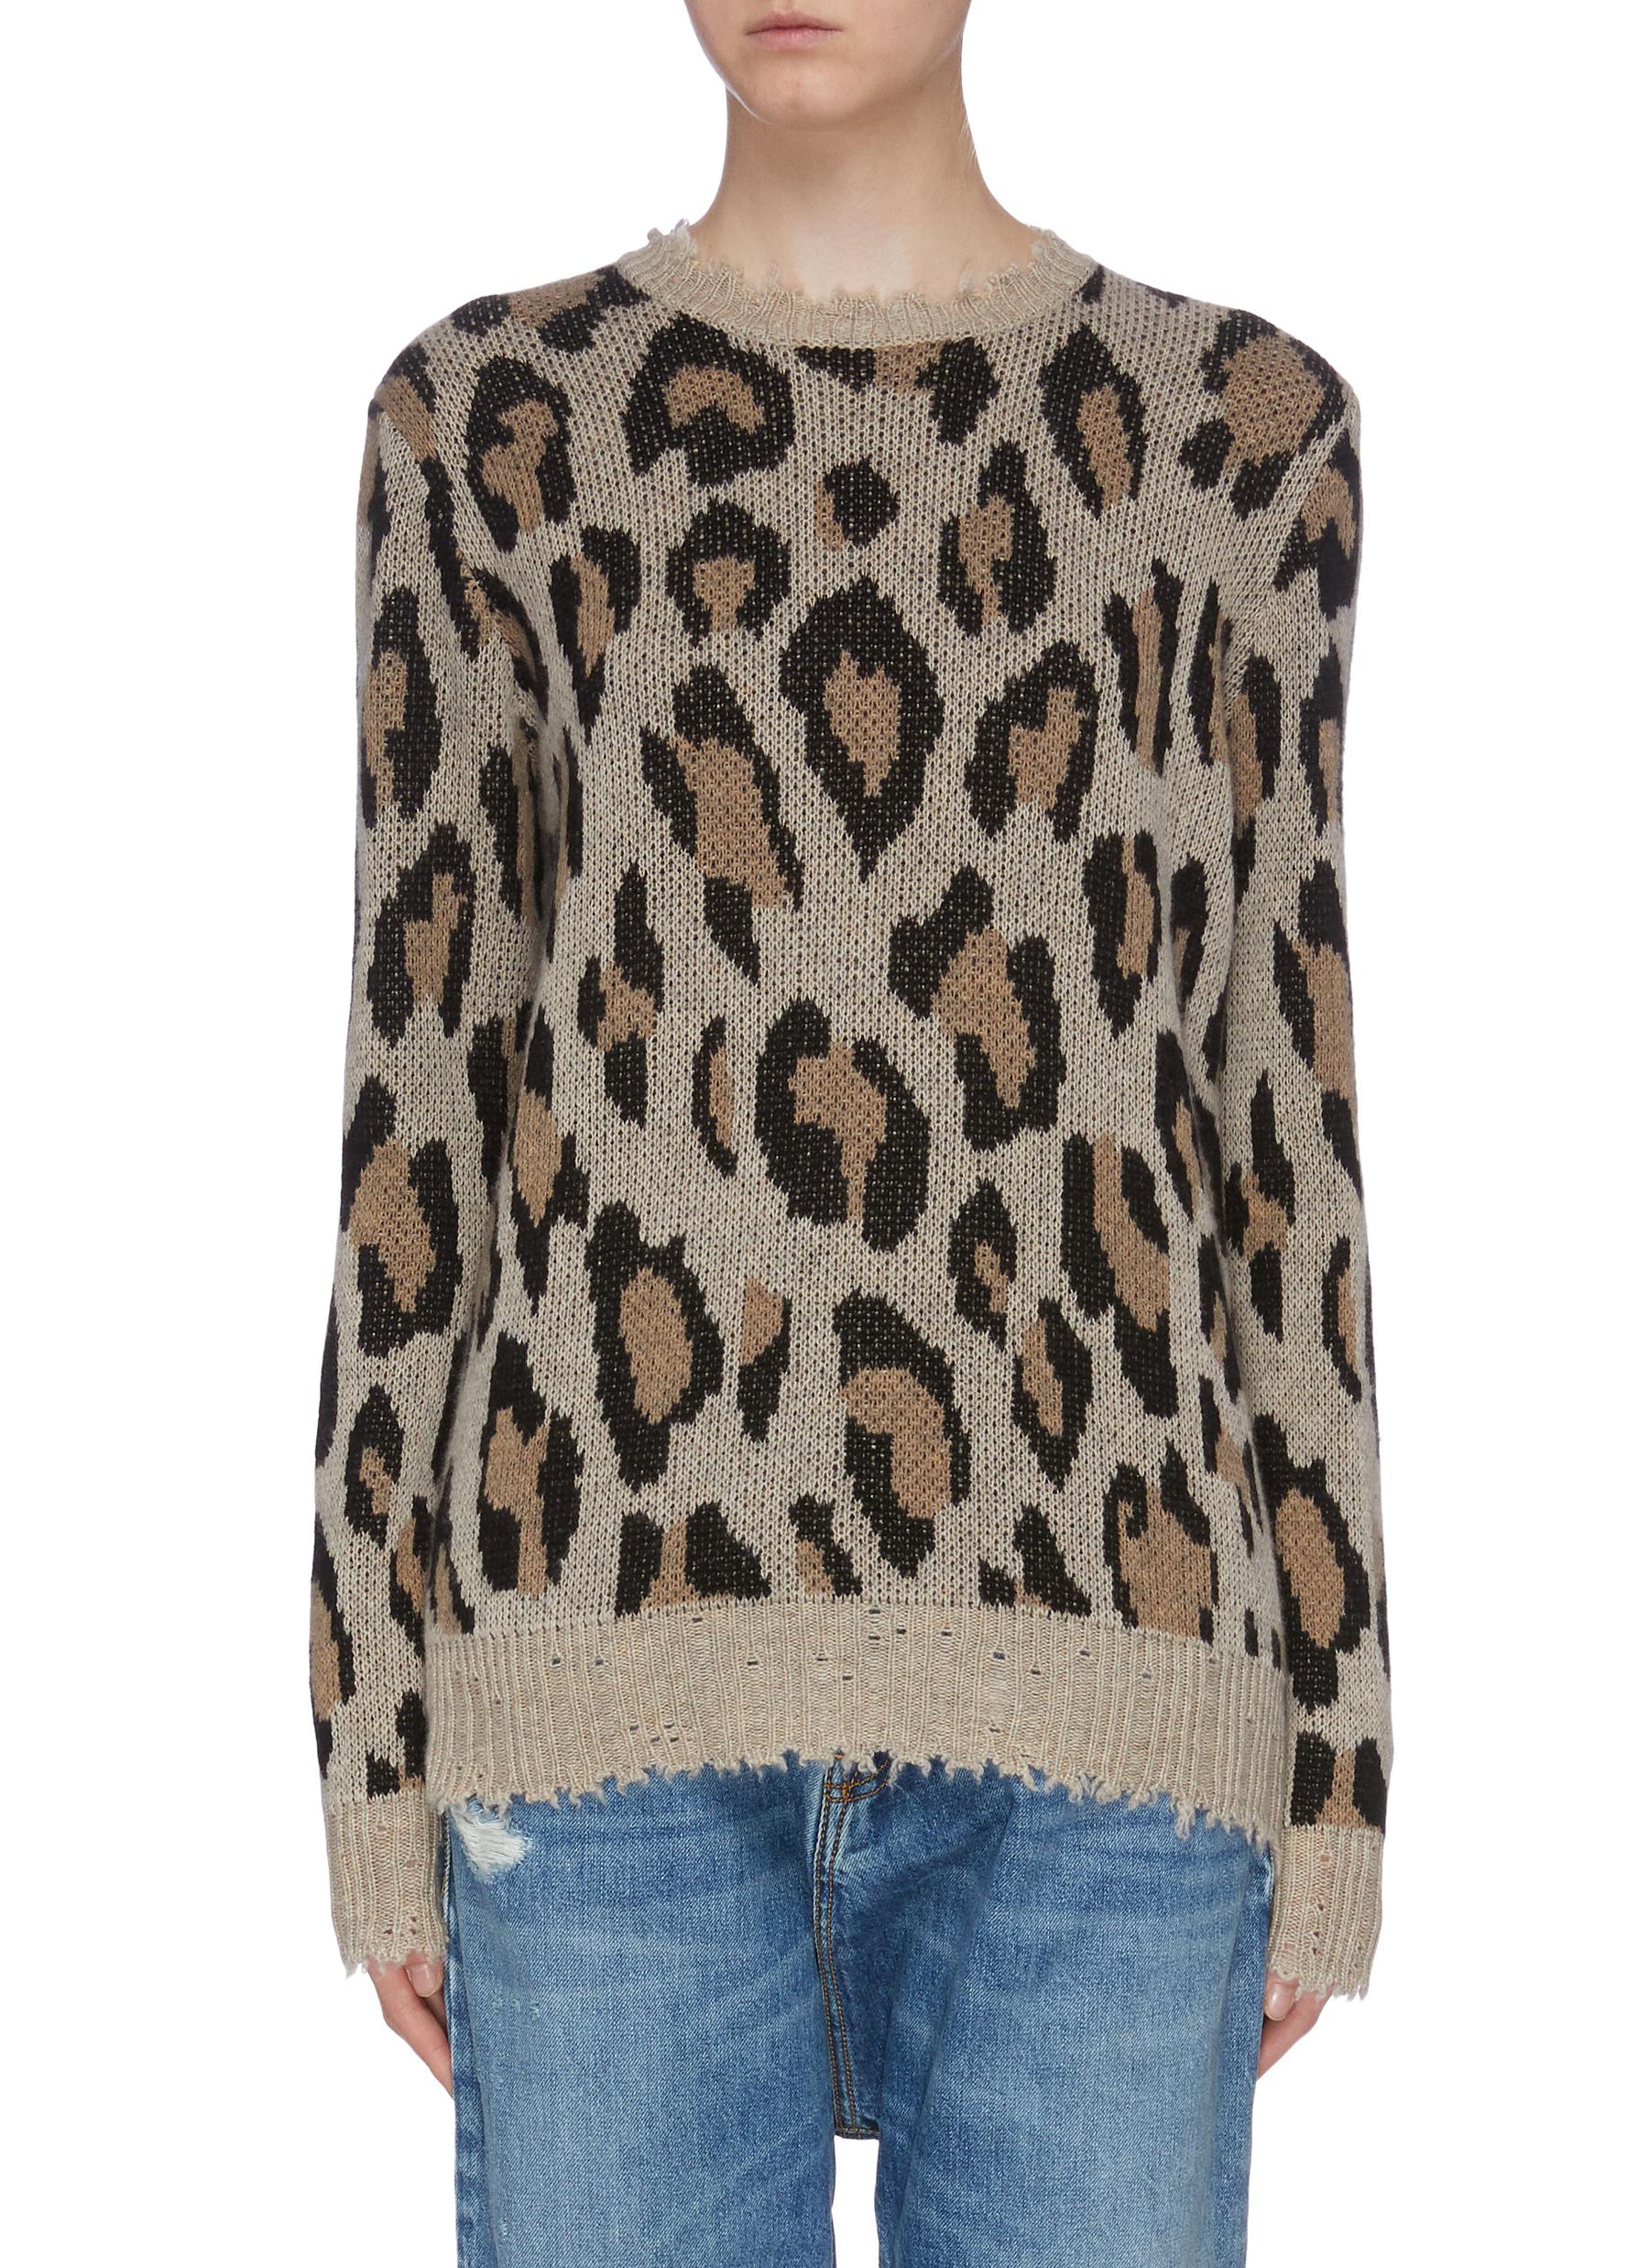 Leopard intarsia sweater by R13